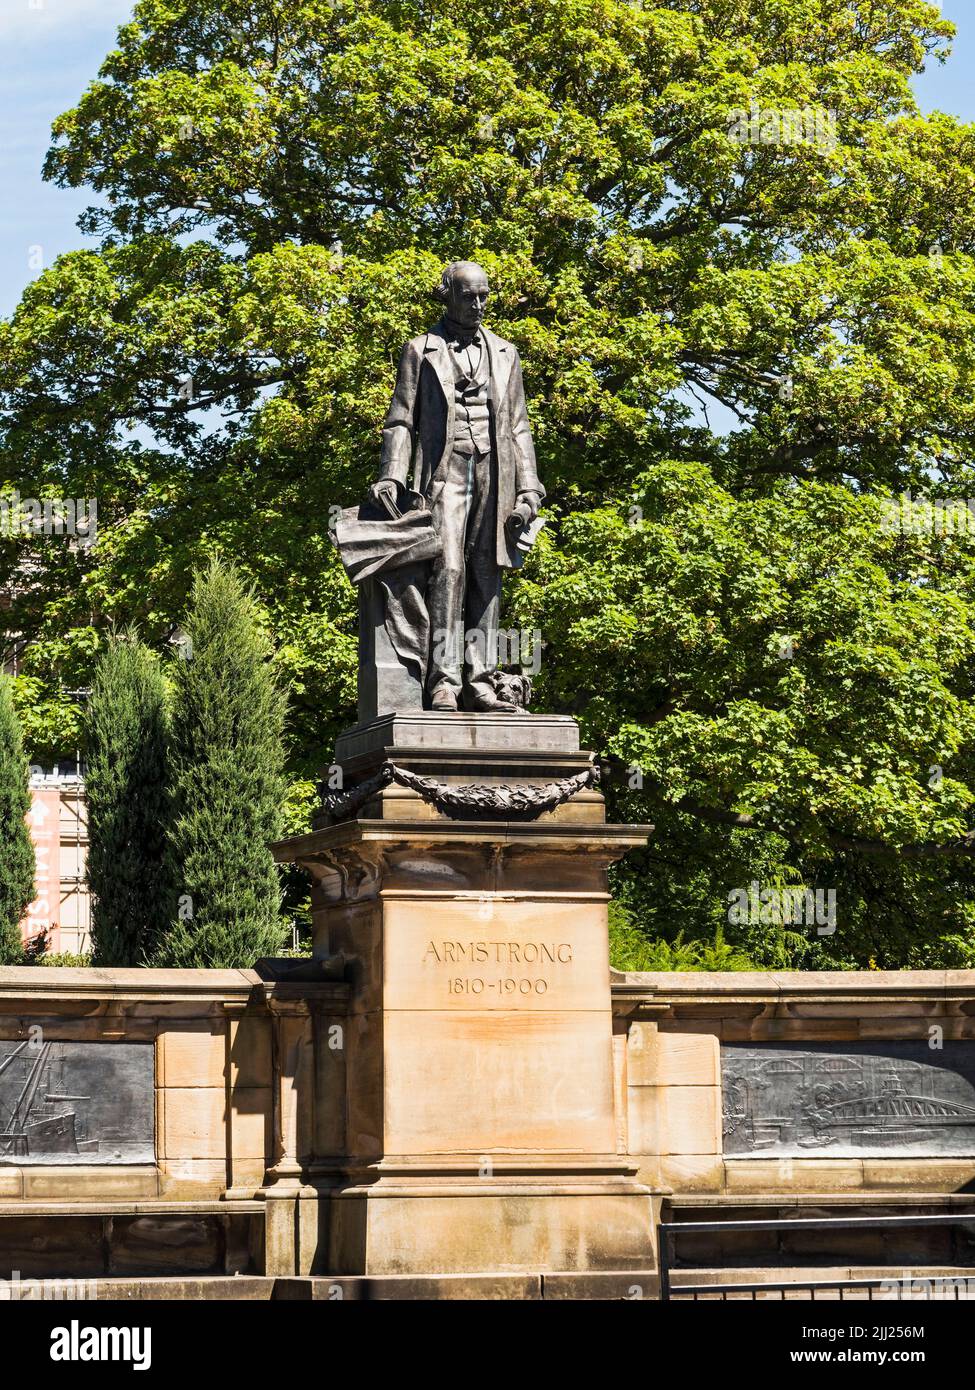 Statue of engineer and industrialist William George Armstrong outside of the Hancock (Great North) Museum, Newcastle upon Tyne, UK Stock Photo